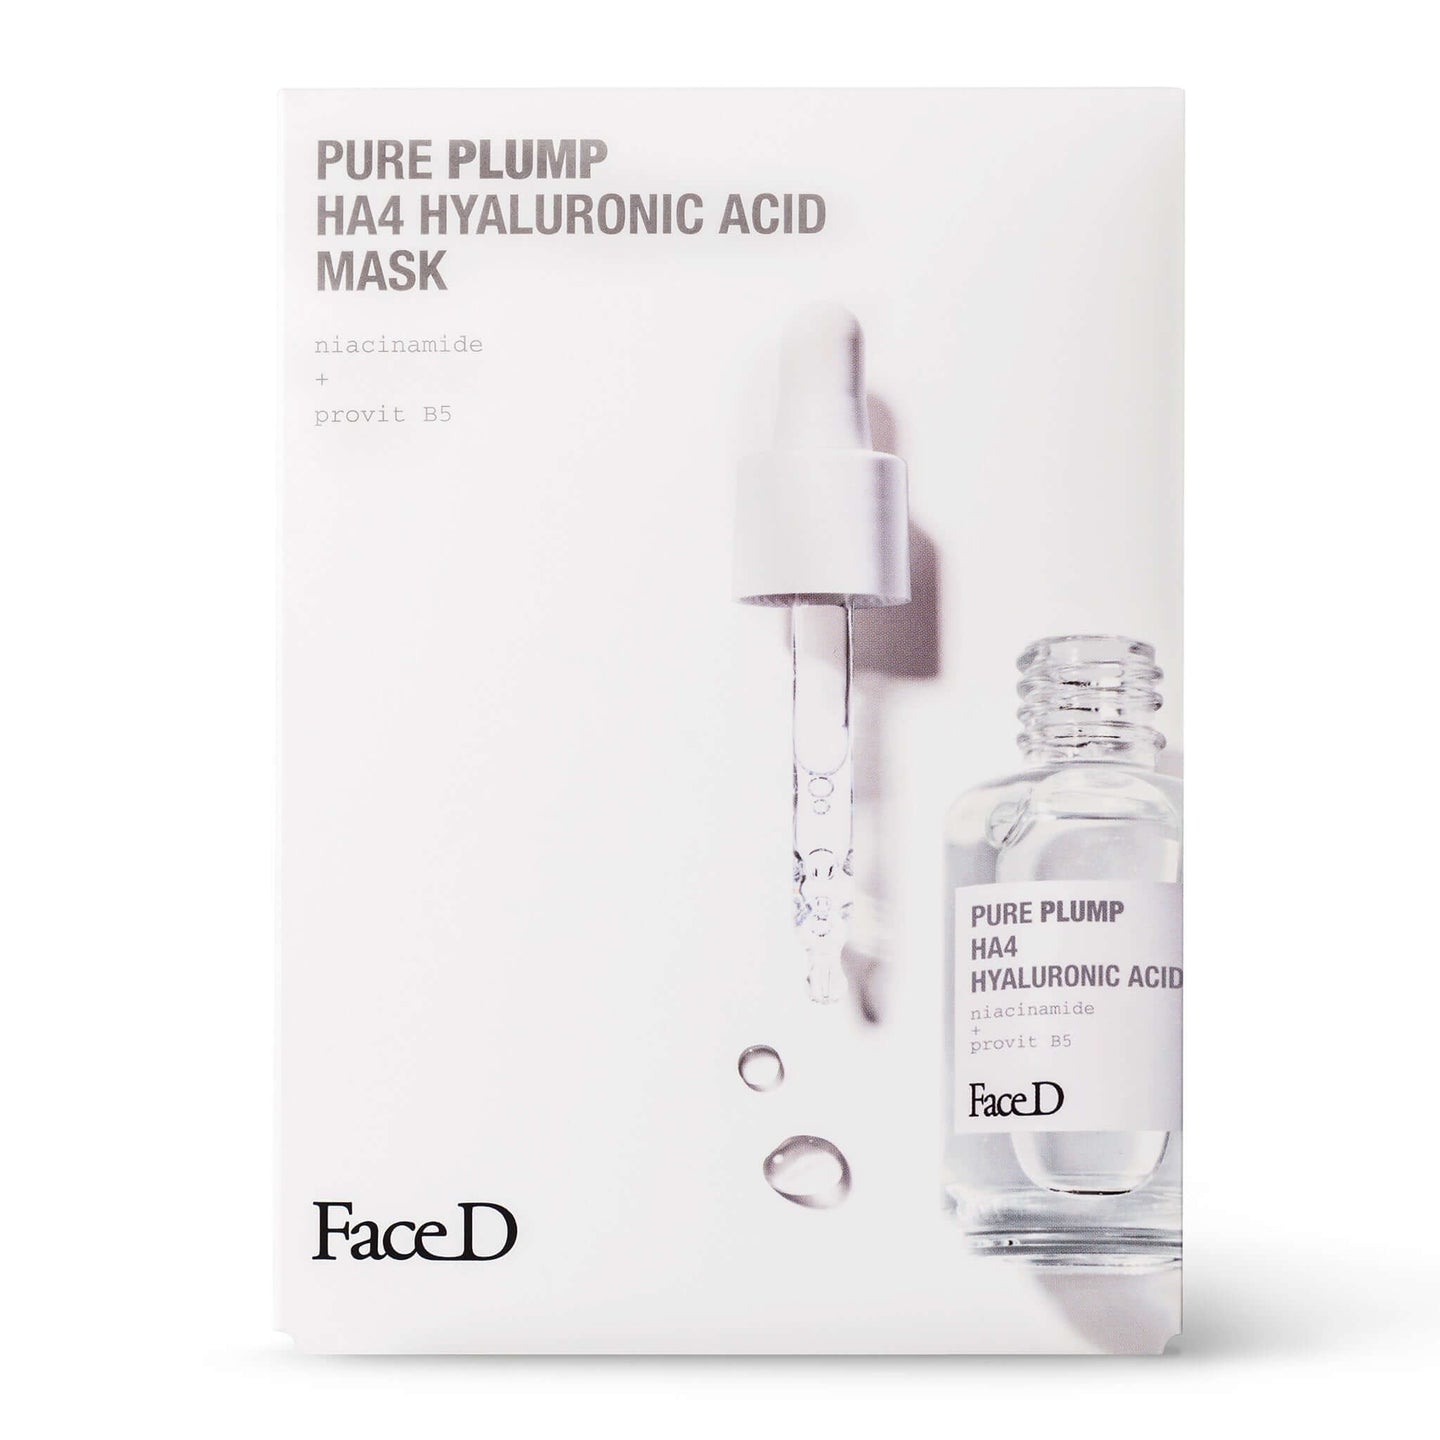 PURE PLUMP HA4 HYALURONIC ACID FACE MASK - 5 PIECES